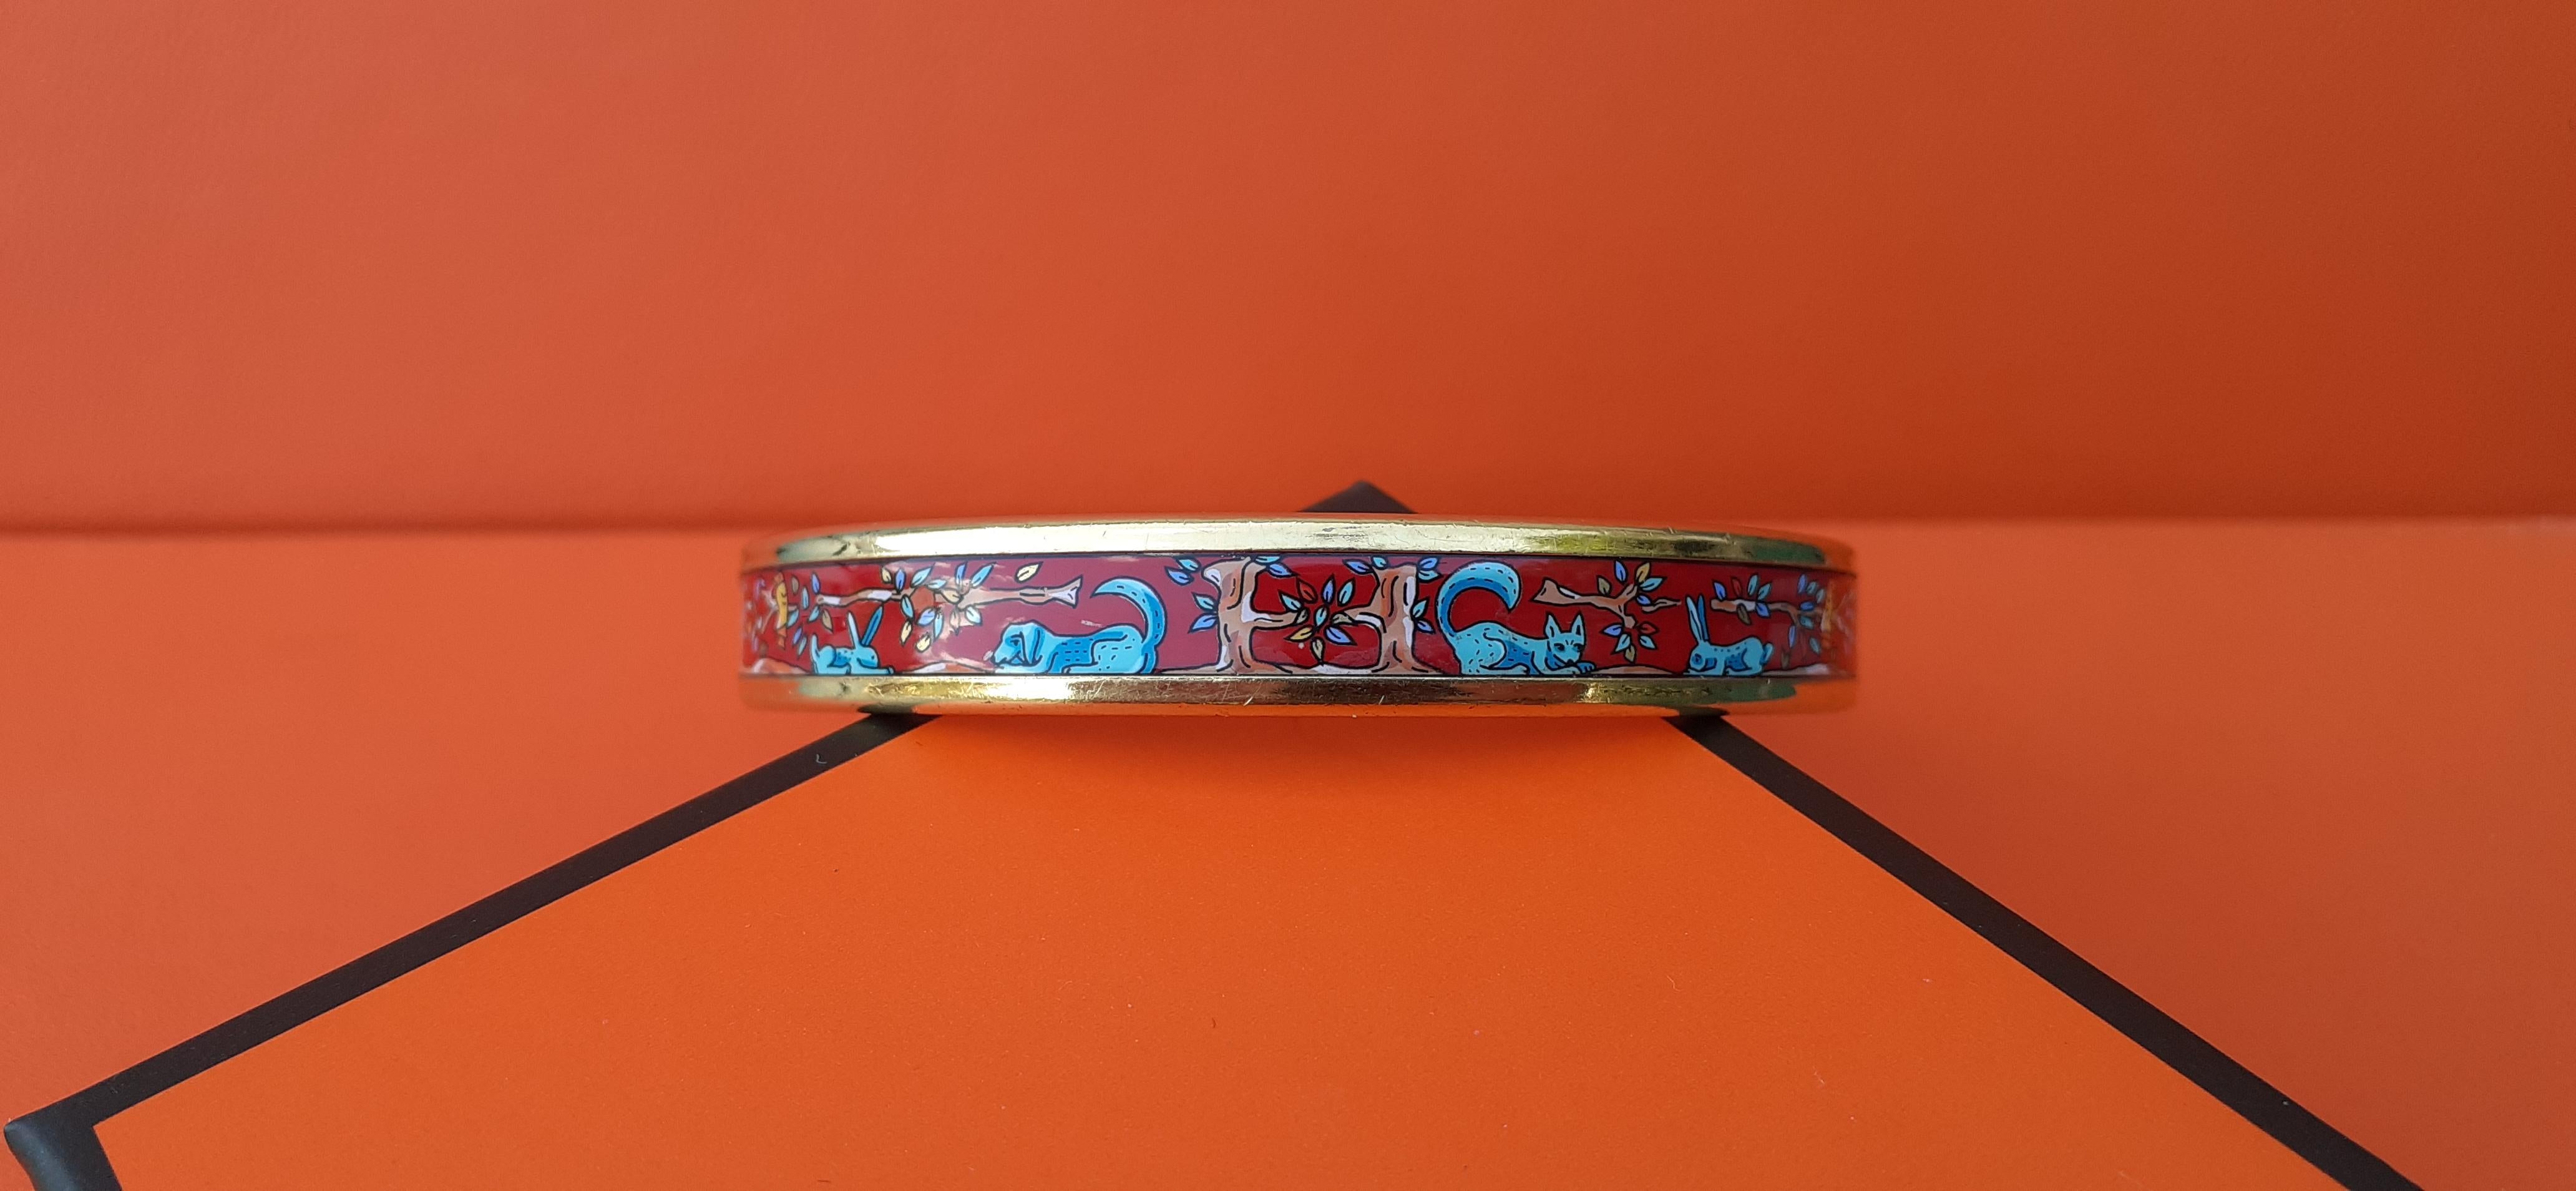 Super Cute Authentic Hermès Bracelet

Pattern: cute Cats, Dogs, Rabbits, Birds, Trees drawing an H

Made in Austria + F

Made of Printed Enamel and Gold plated Hardware

Colorways: Red, Turquoise Blue, Yellow, Brown

Some small leaves are golden, it